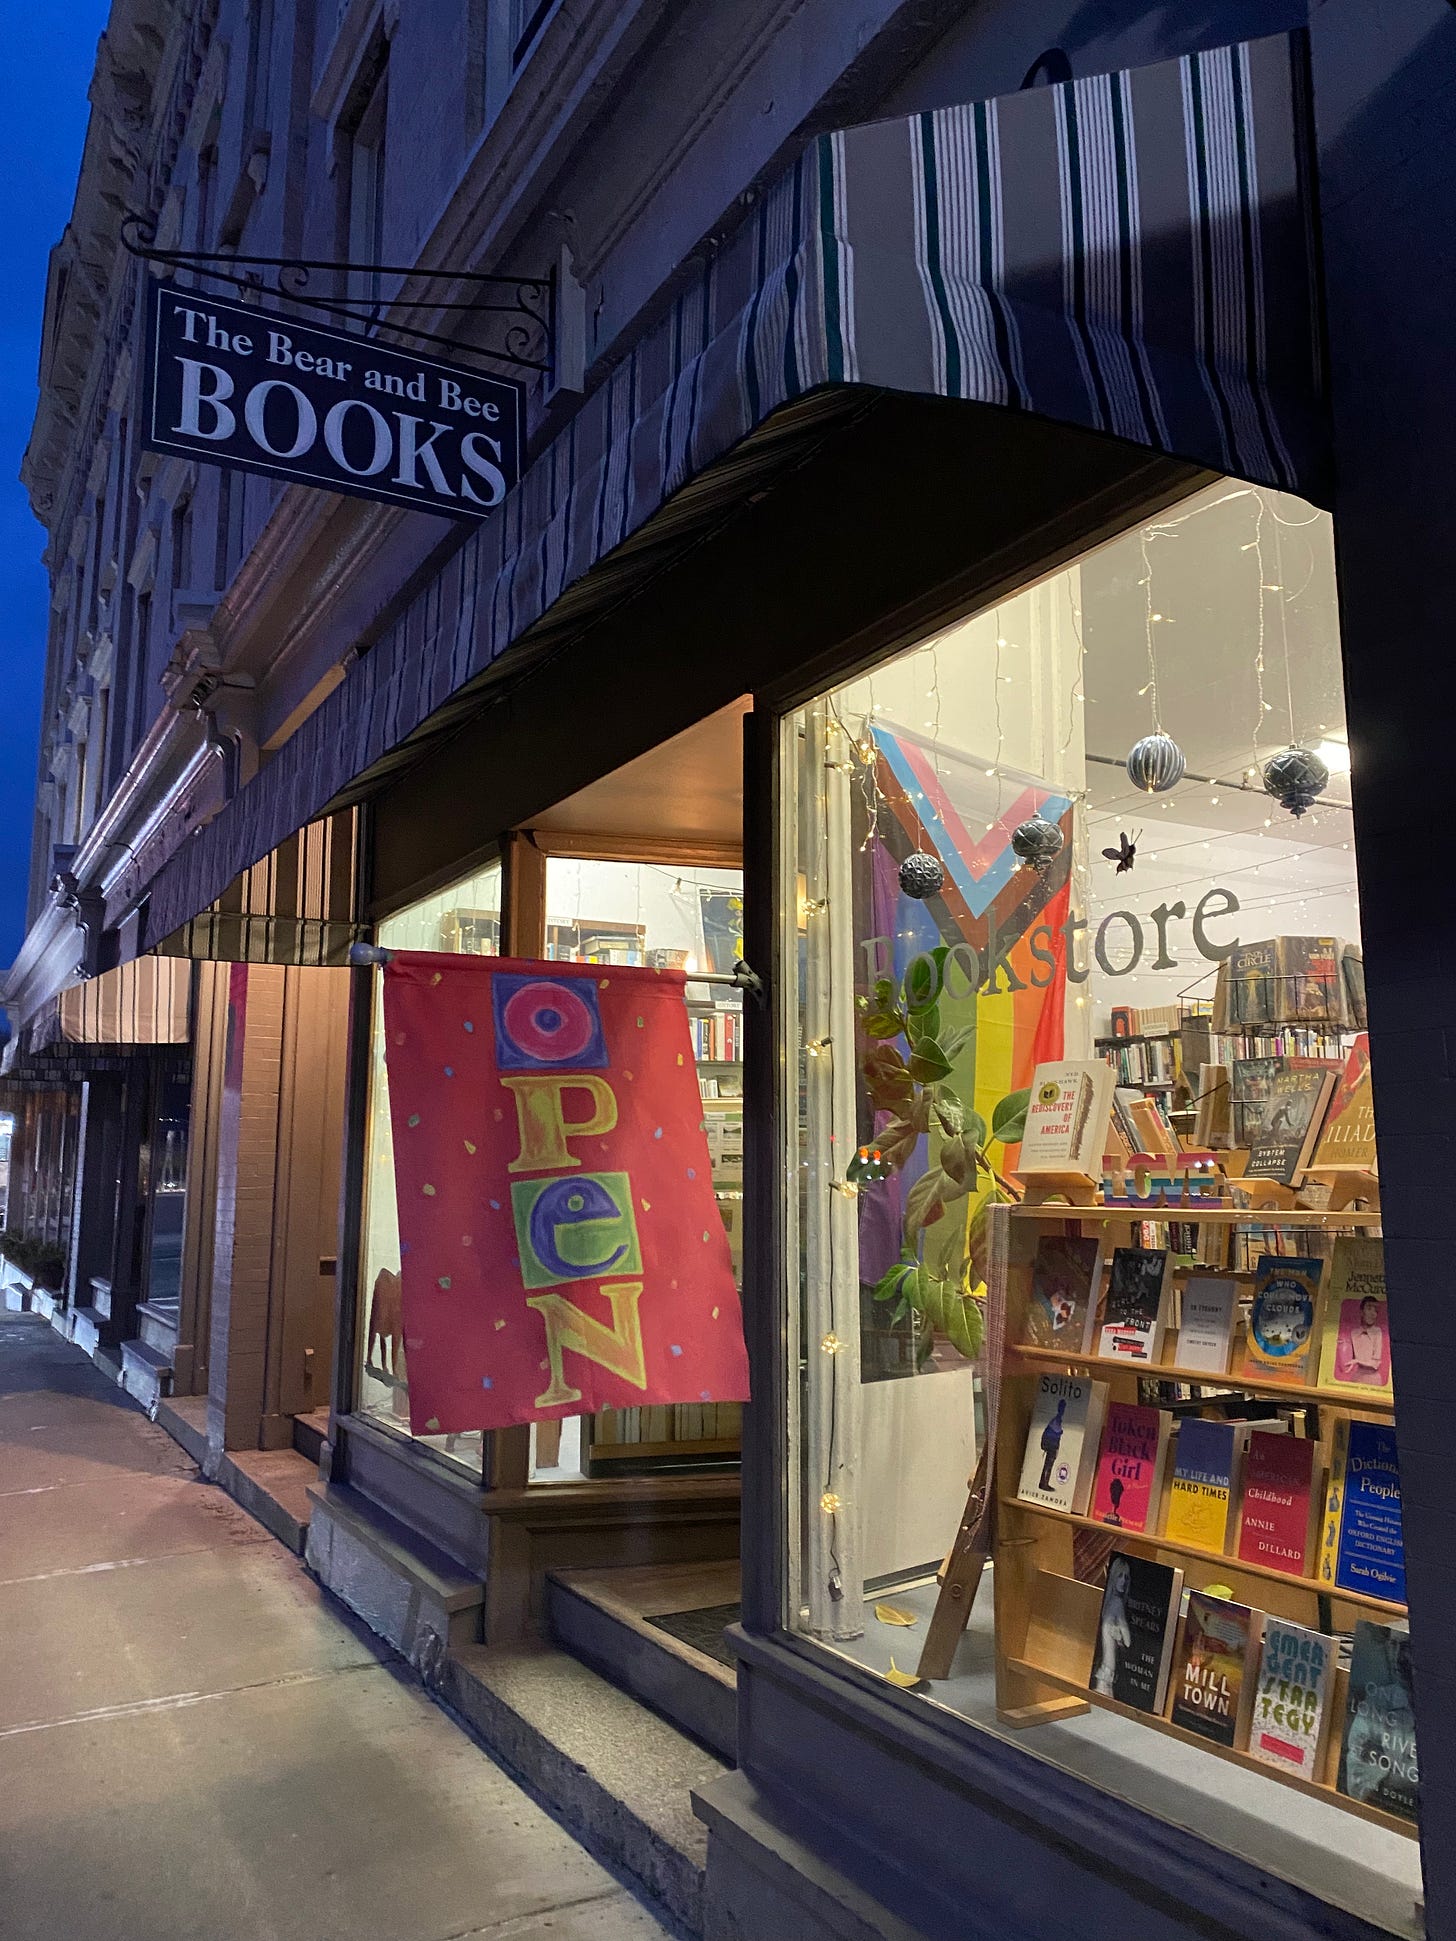 A lit up bookstore window on a dark night. There’s a colorful display of books and a big pride flag.